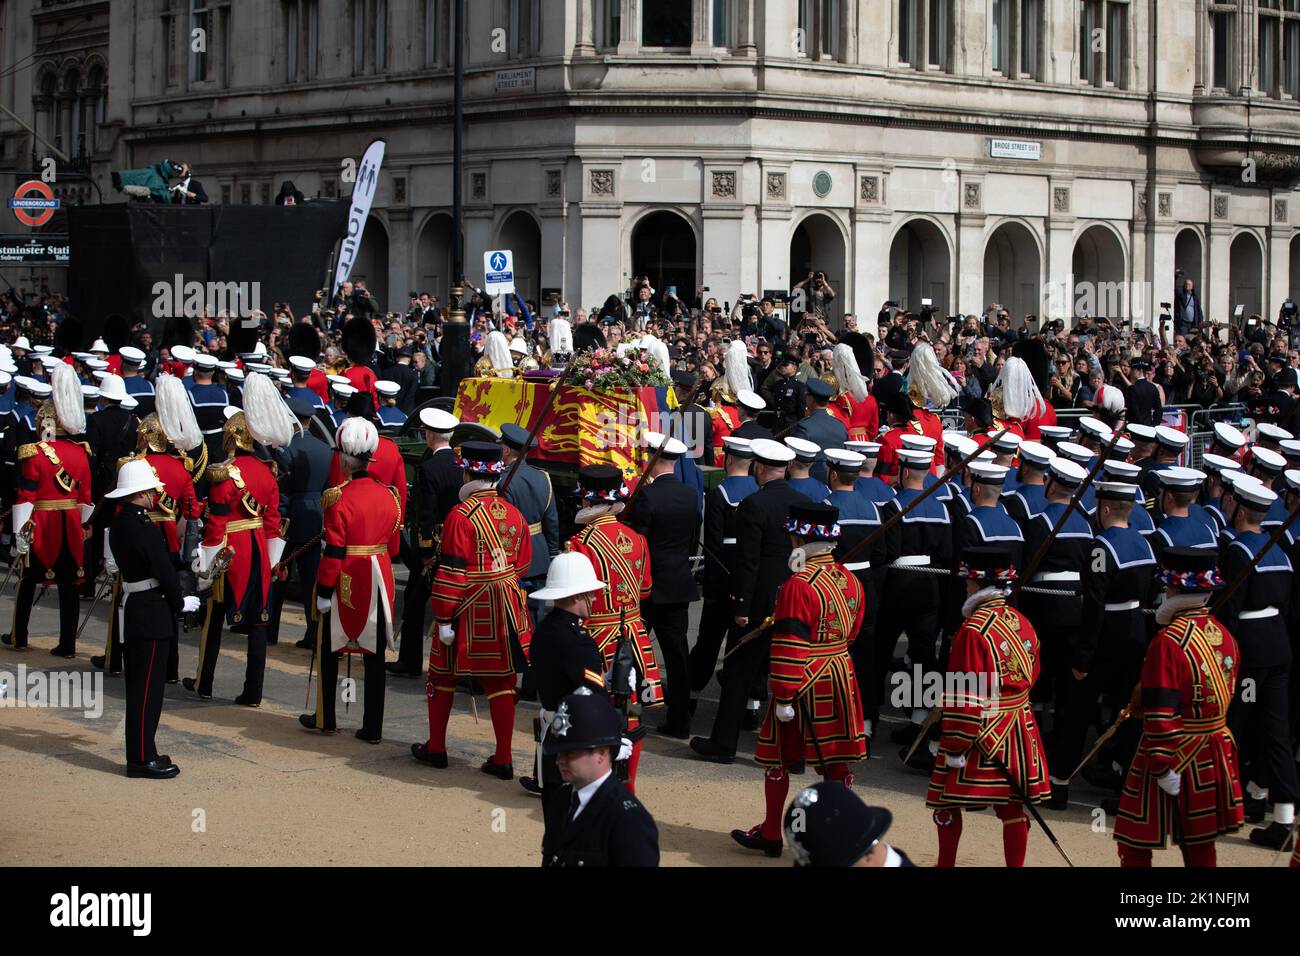 London, England. 19th September, 2022. The coffin of Queen Elizabeth II was carried through London one last time in a procession as part of the monarch's State Funeral.The event was one of the biggest the country has ever seen. Credit: Kiki Streitberger / Alamy Live News Stock Photo